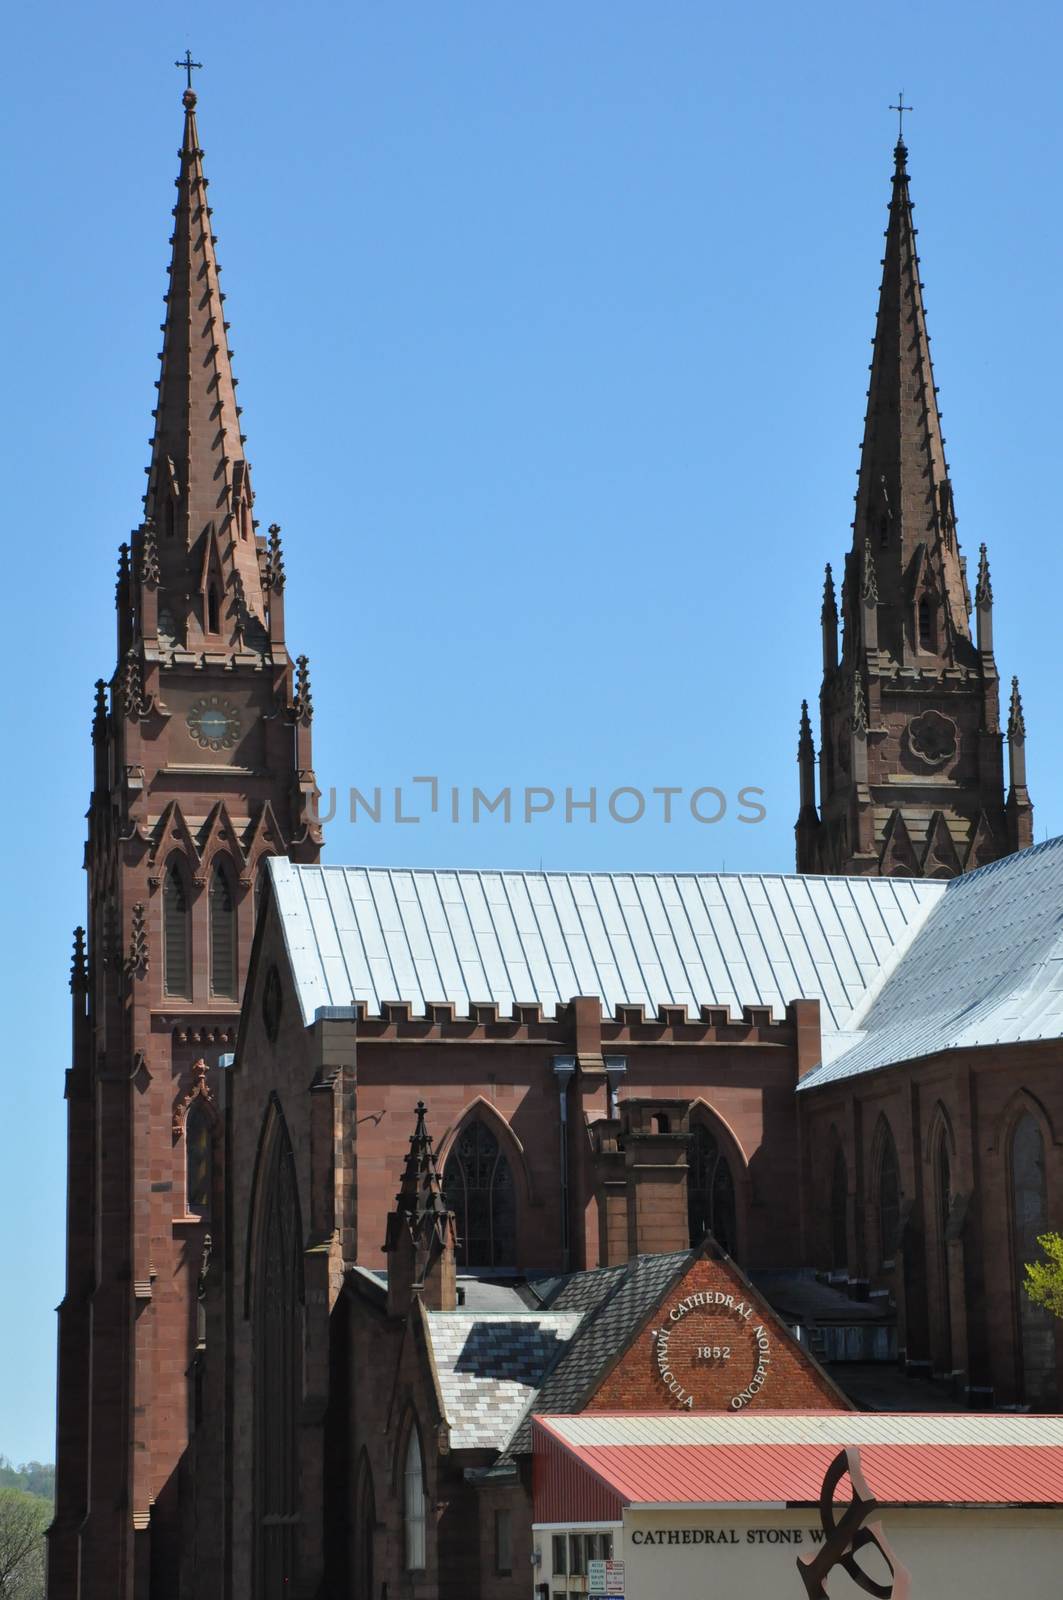 Cathedral of the Immaculate Conception in Albany, New York